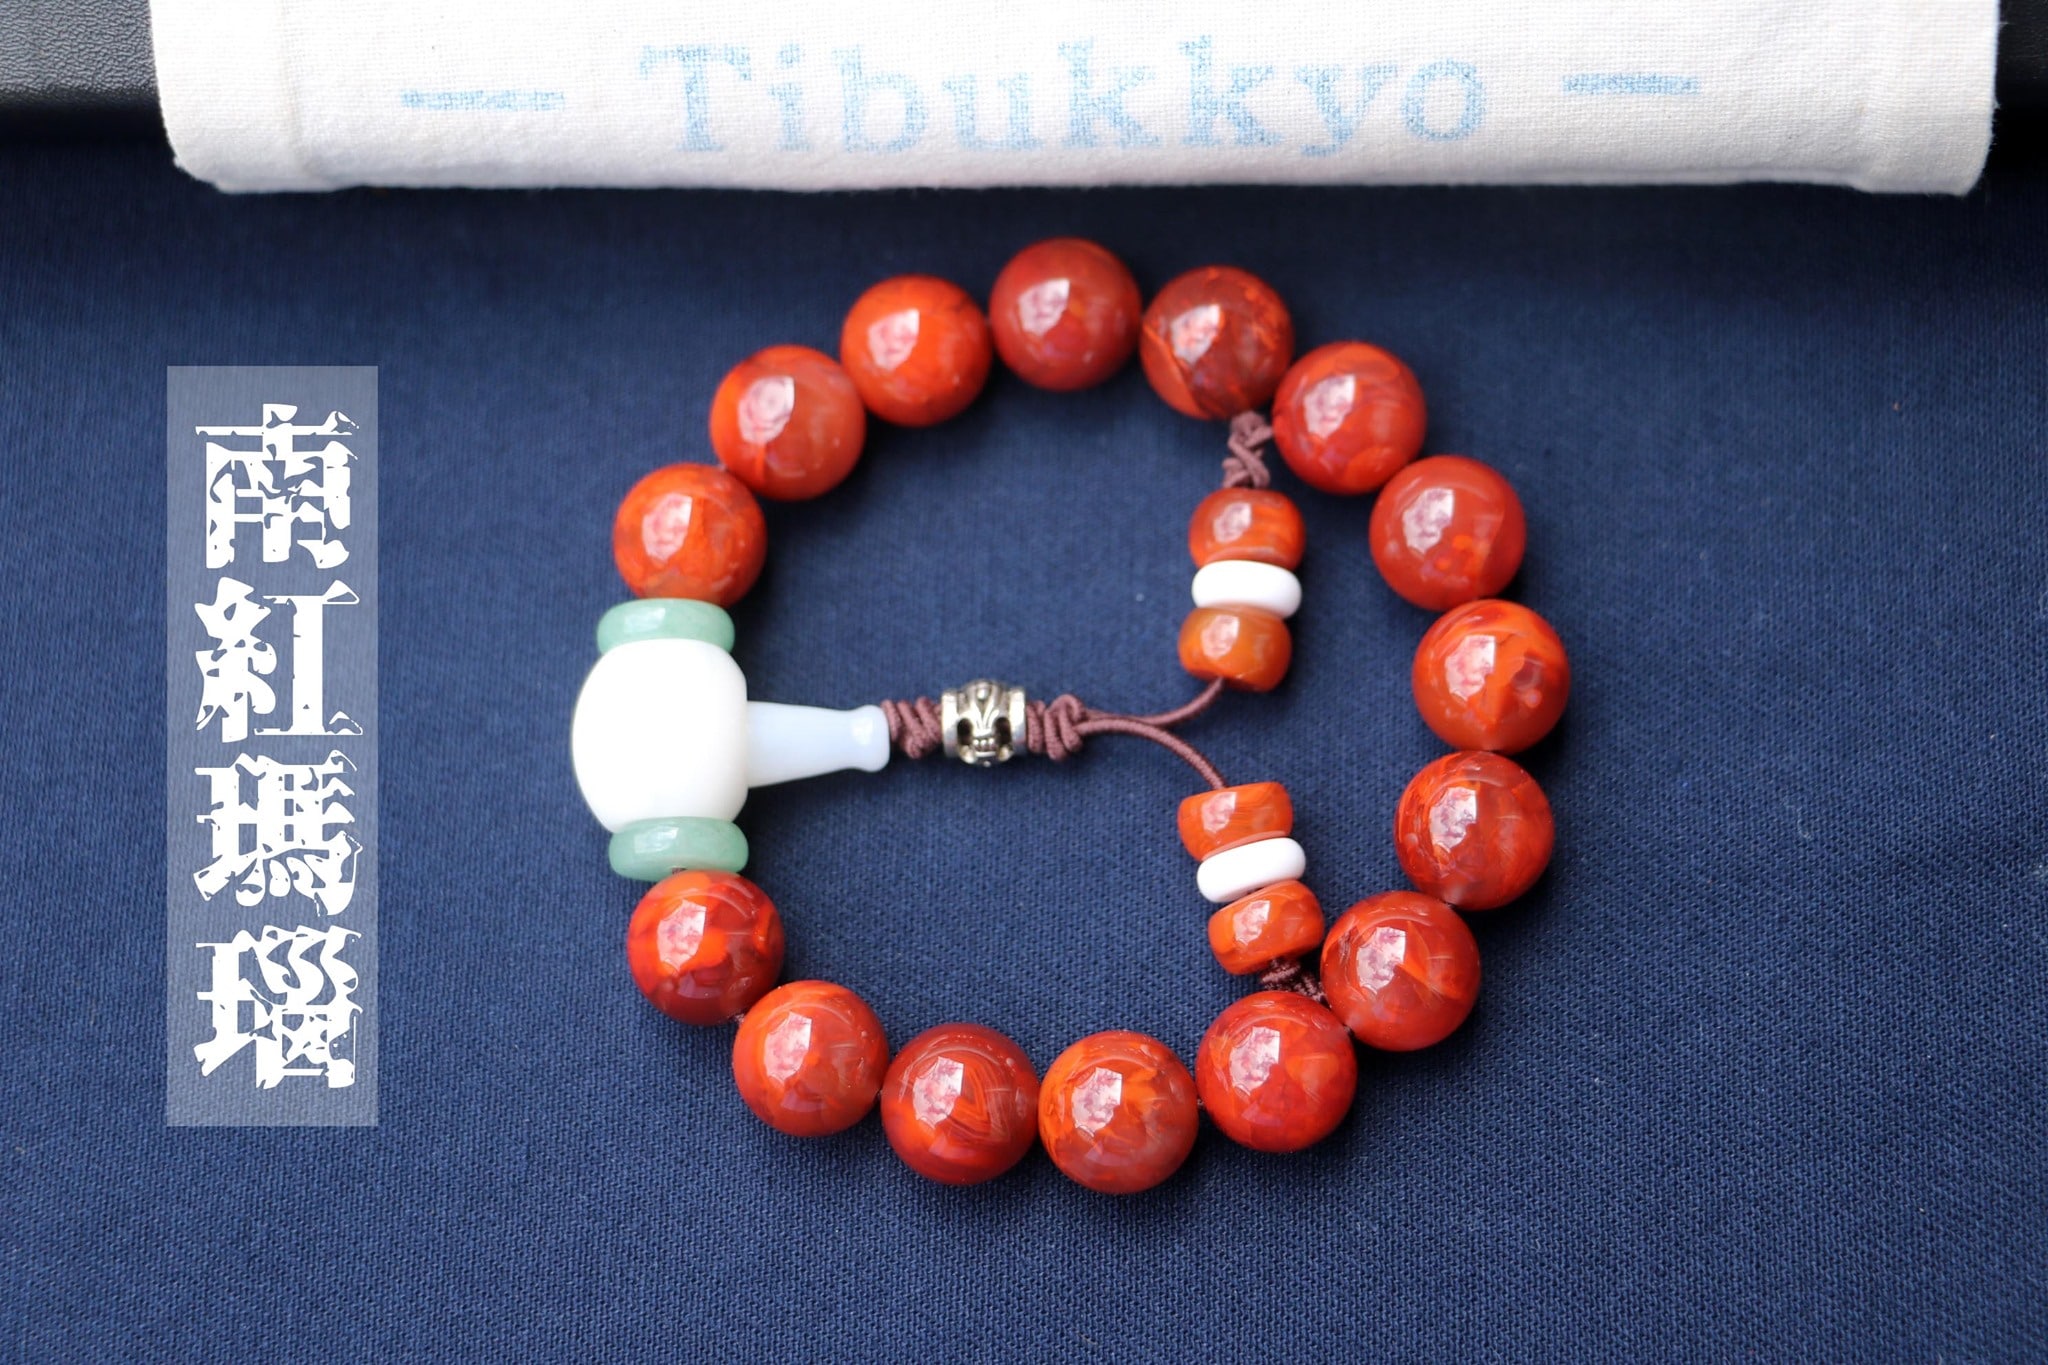 TIBUKKYO Taiwan Derong Collection｜Exquisite Flame Pattern South Red Agate Hand Bead 12mm｜Jade Clam Buddha Head｜Customized Beaded Design